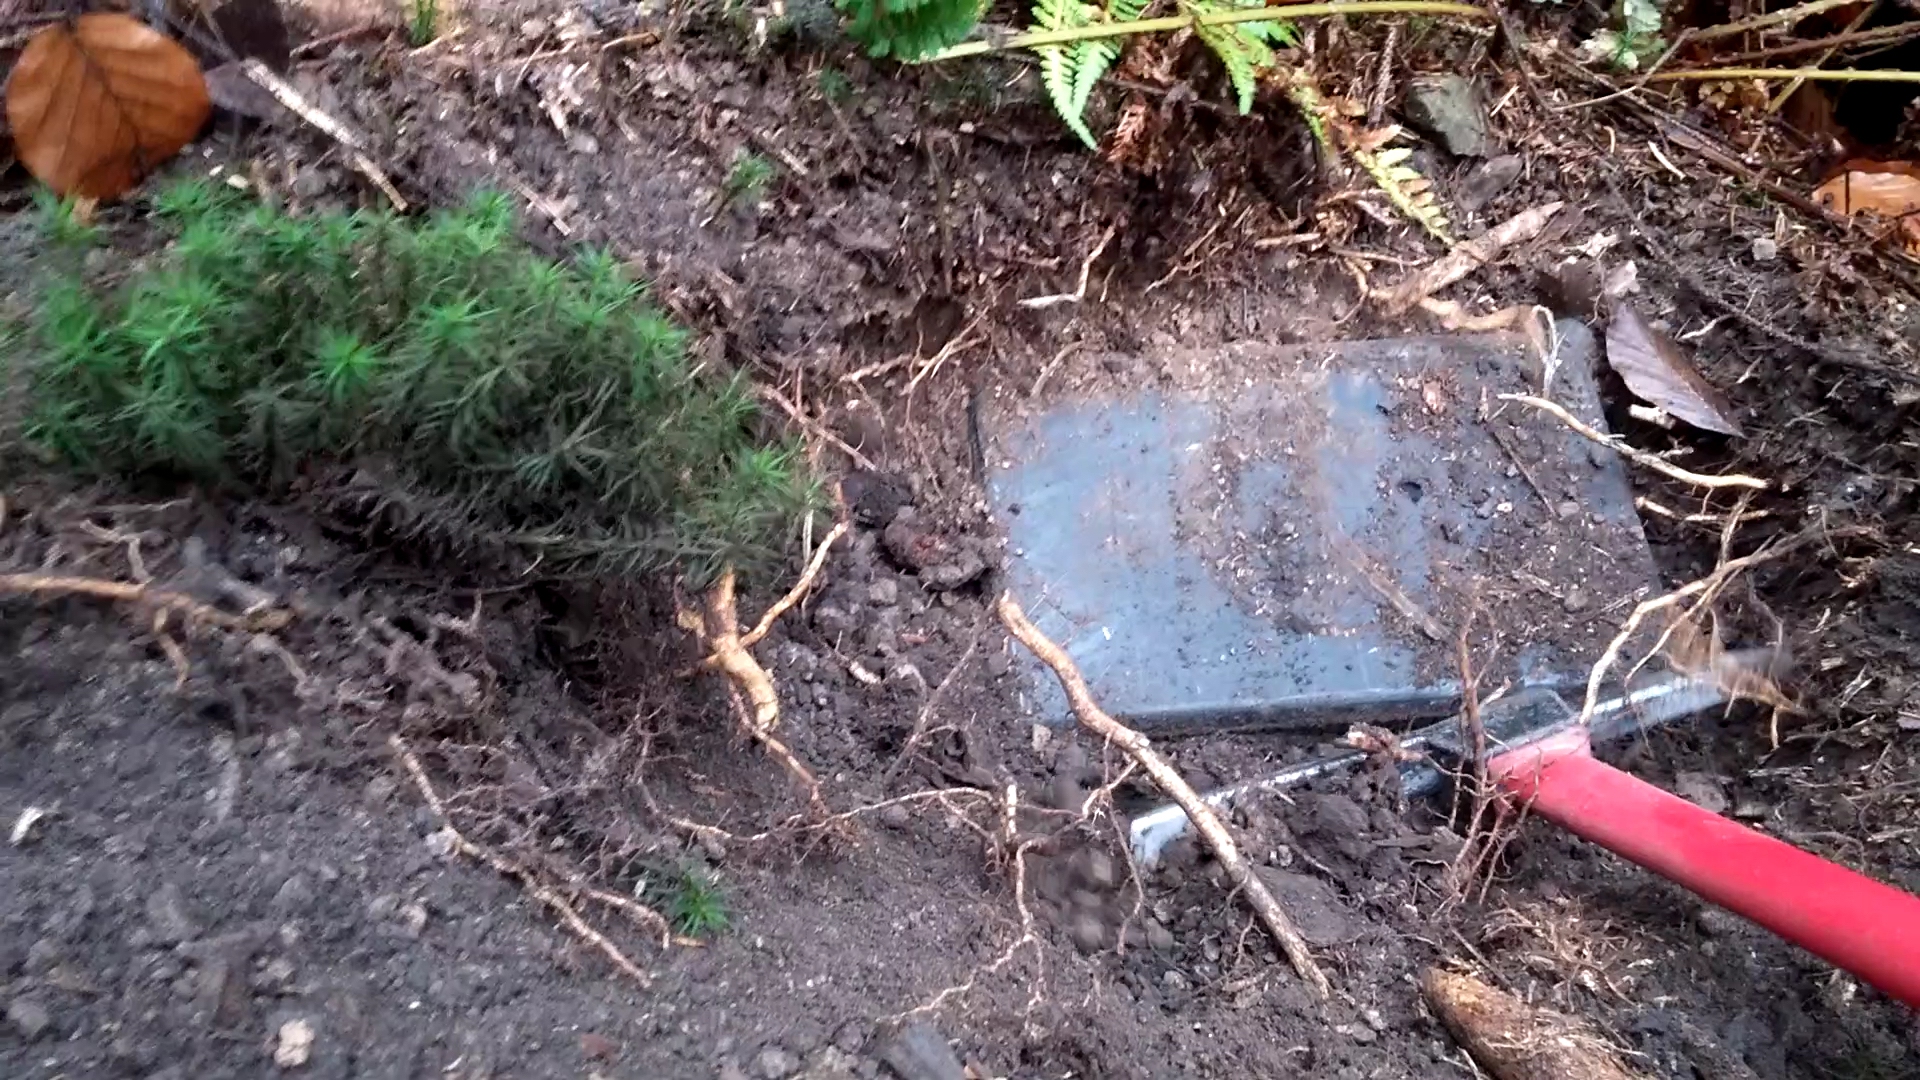 The forgotten cache as found in a West-European country in 2018